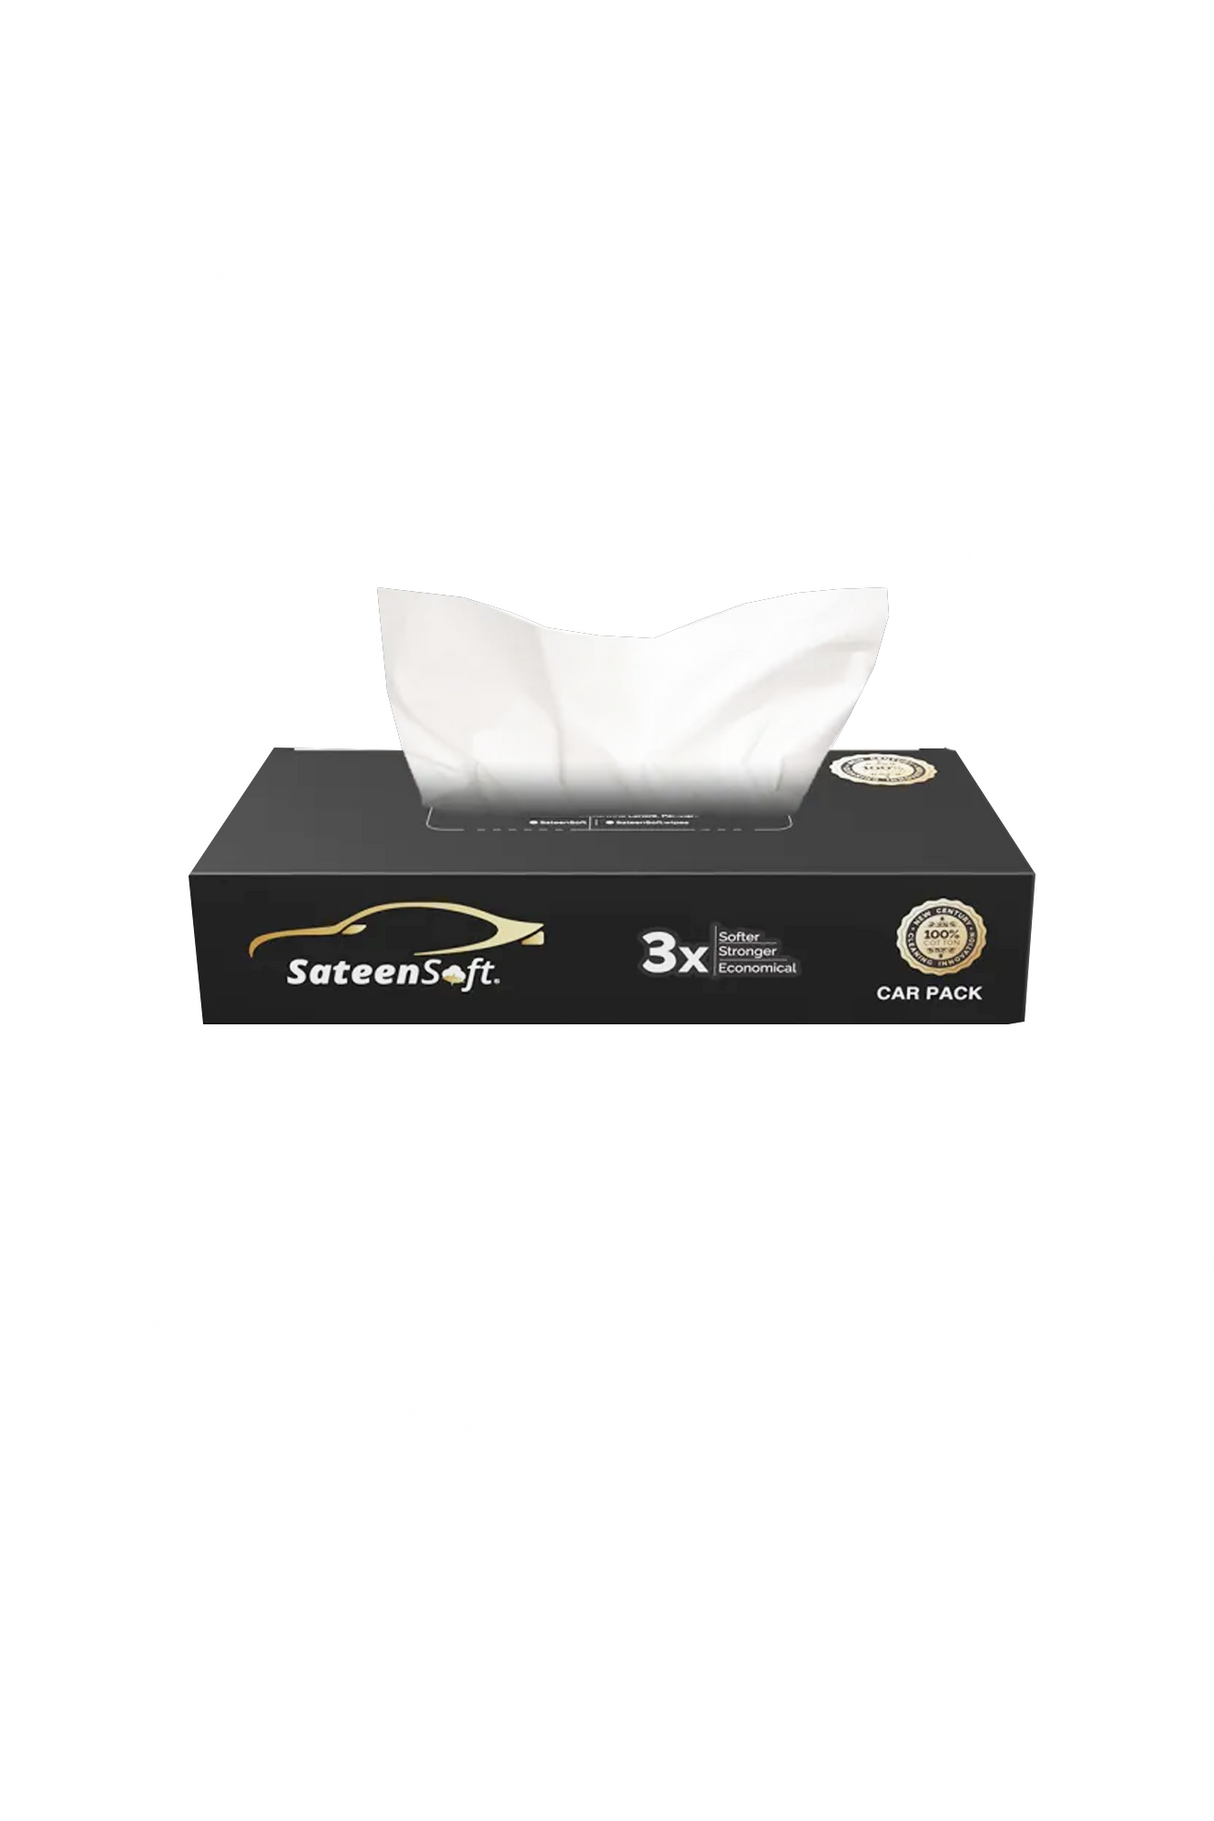 sateen soft wipes car pack cotton dry